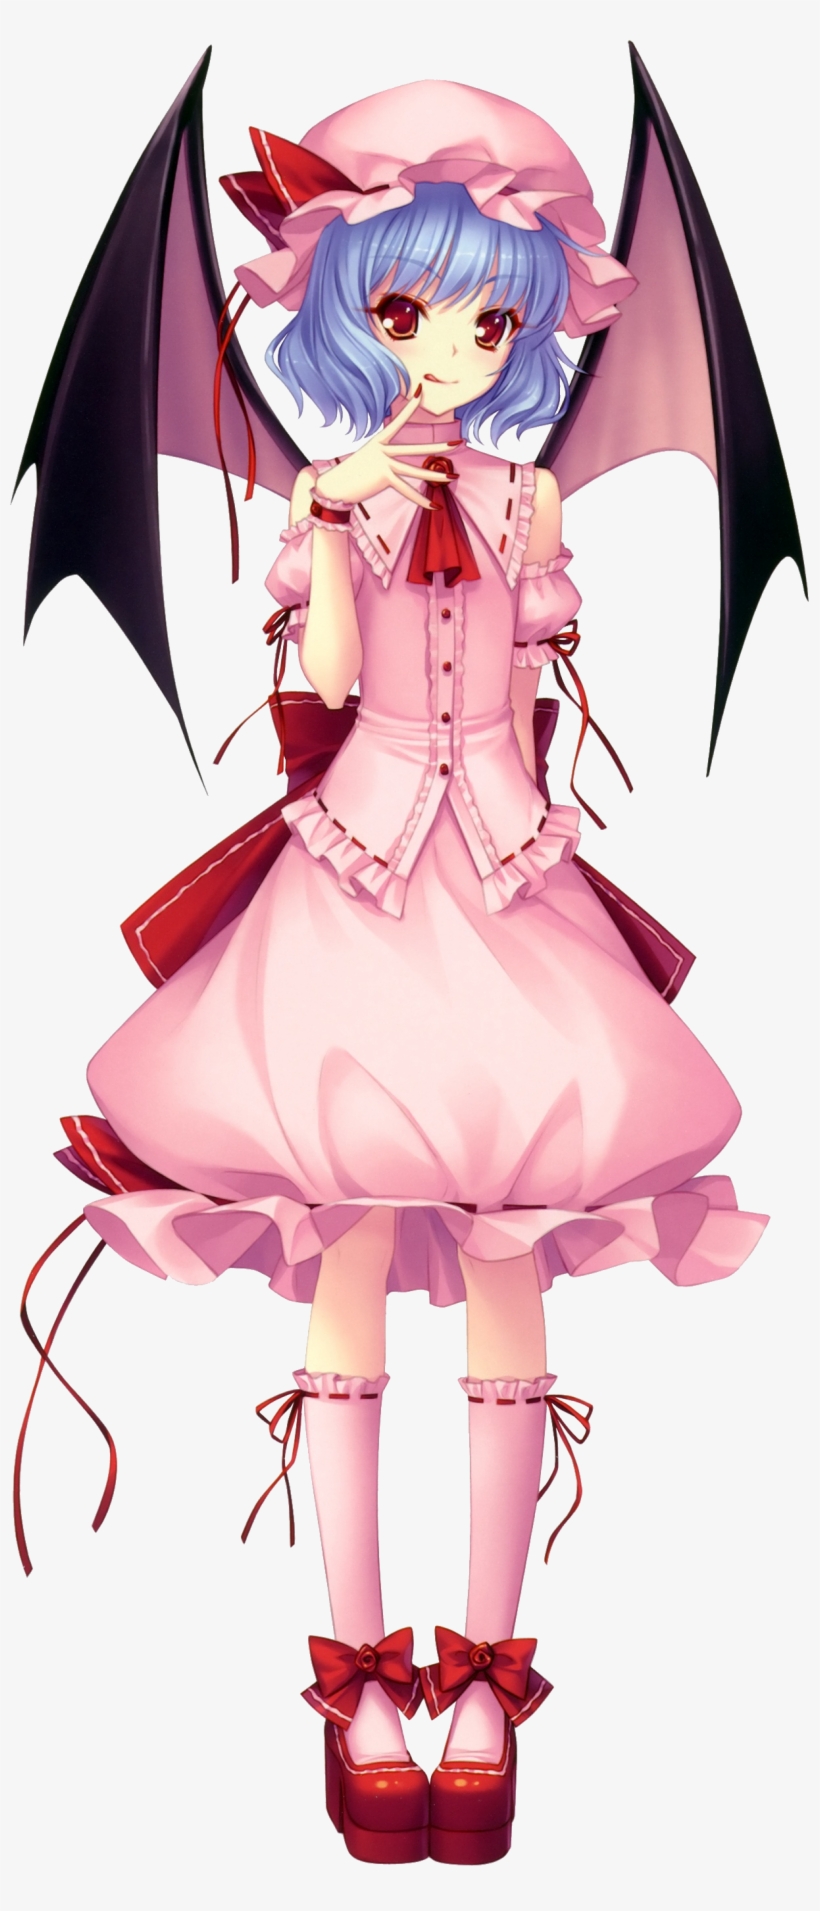 Remilia Scarlet - Remilia And Flandre Scarlet From Touhou, transparent png #1510022